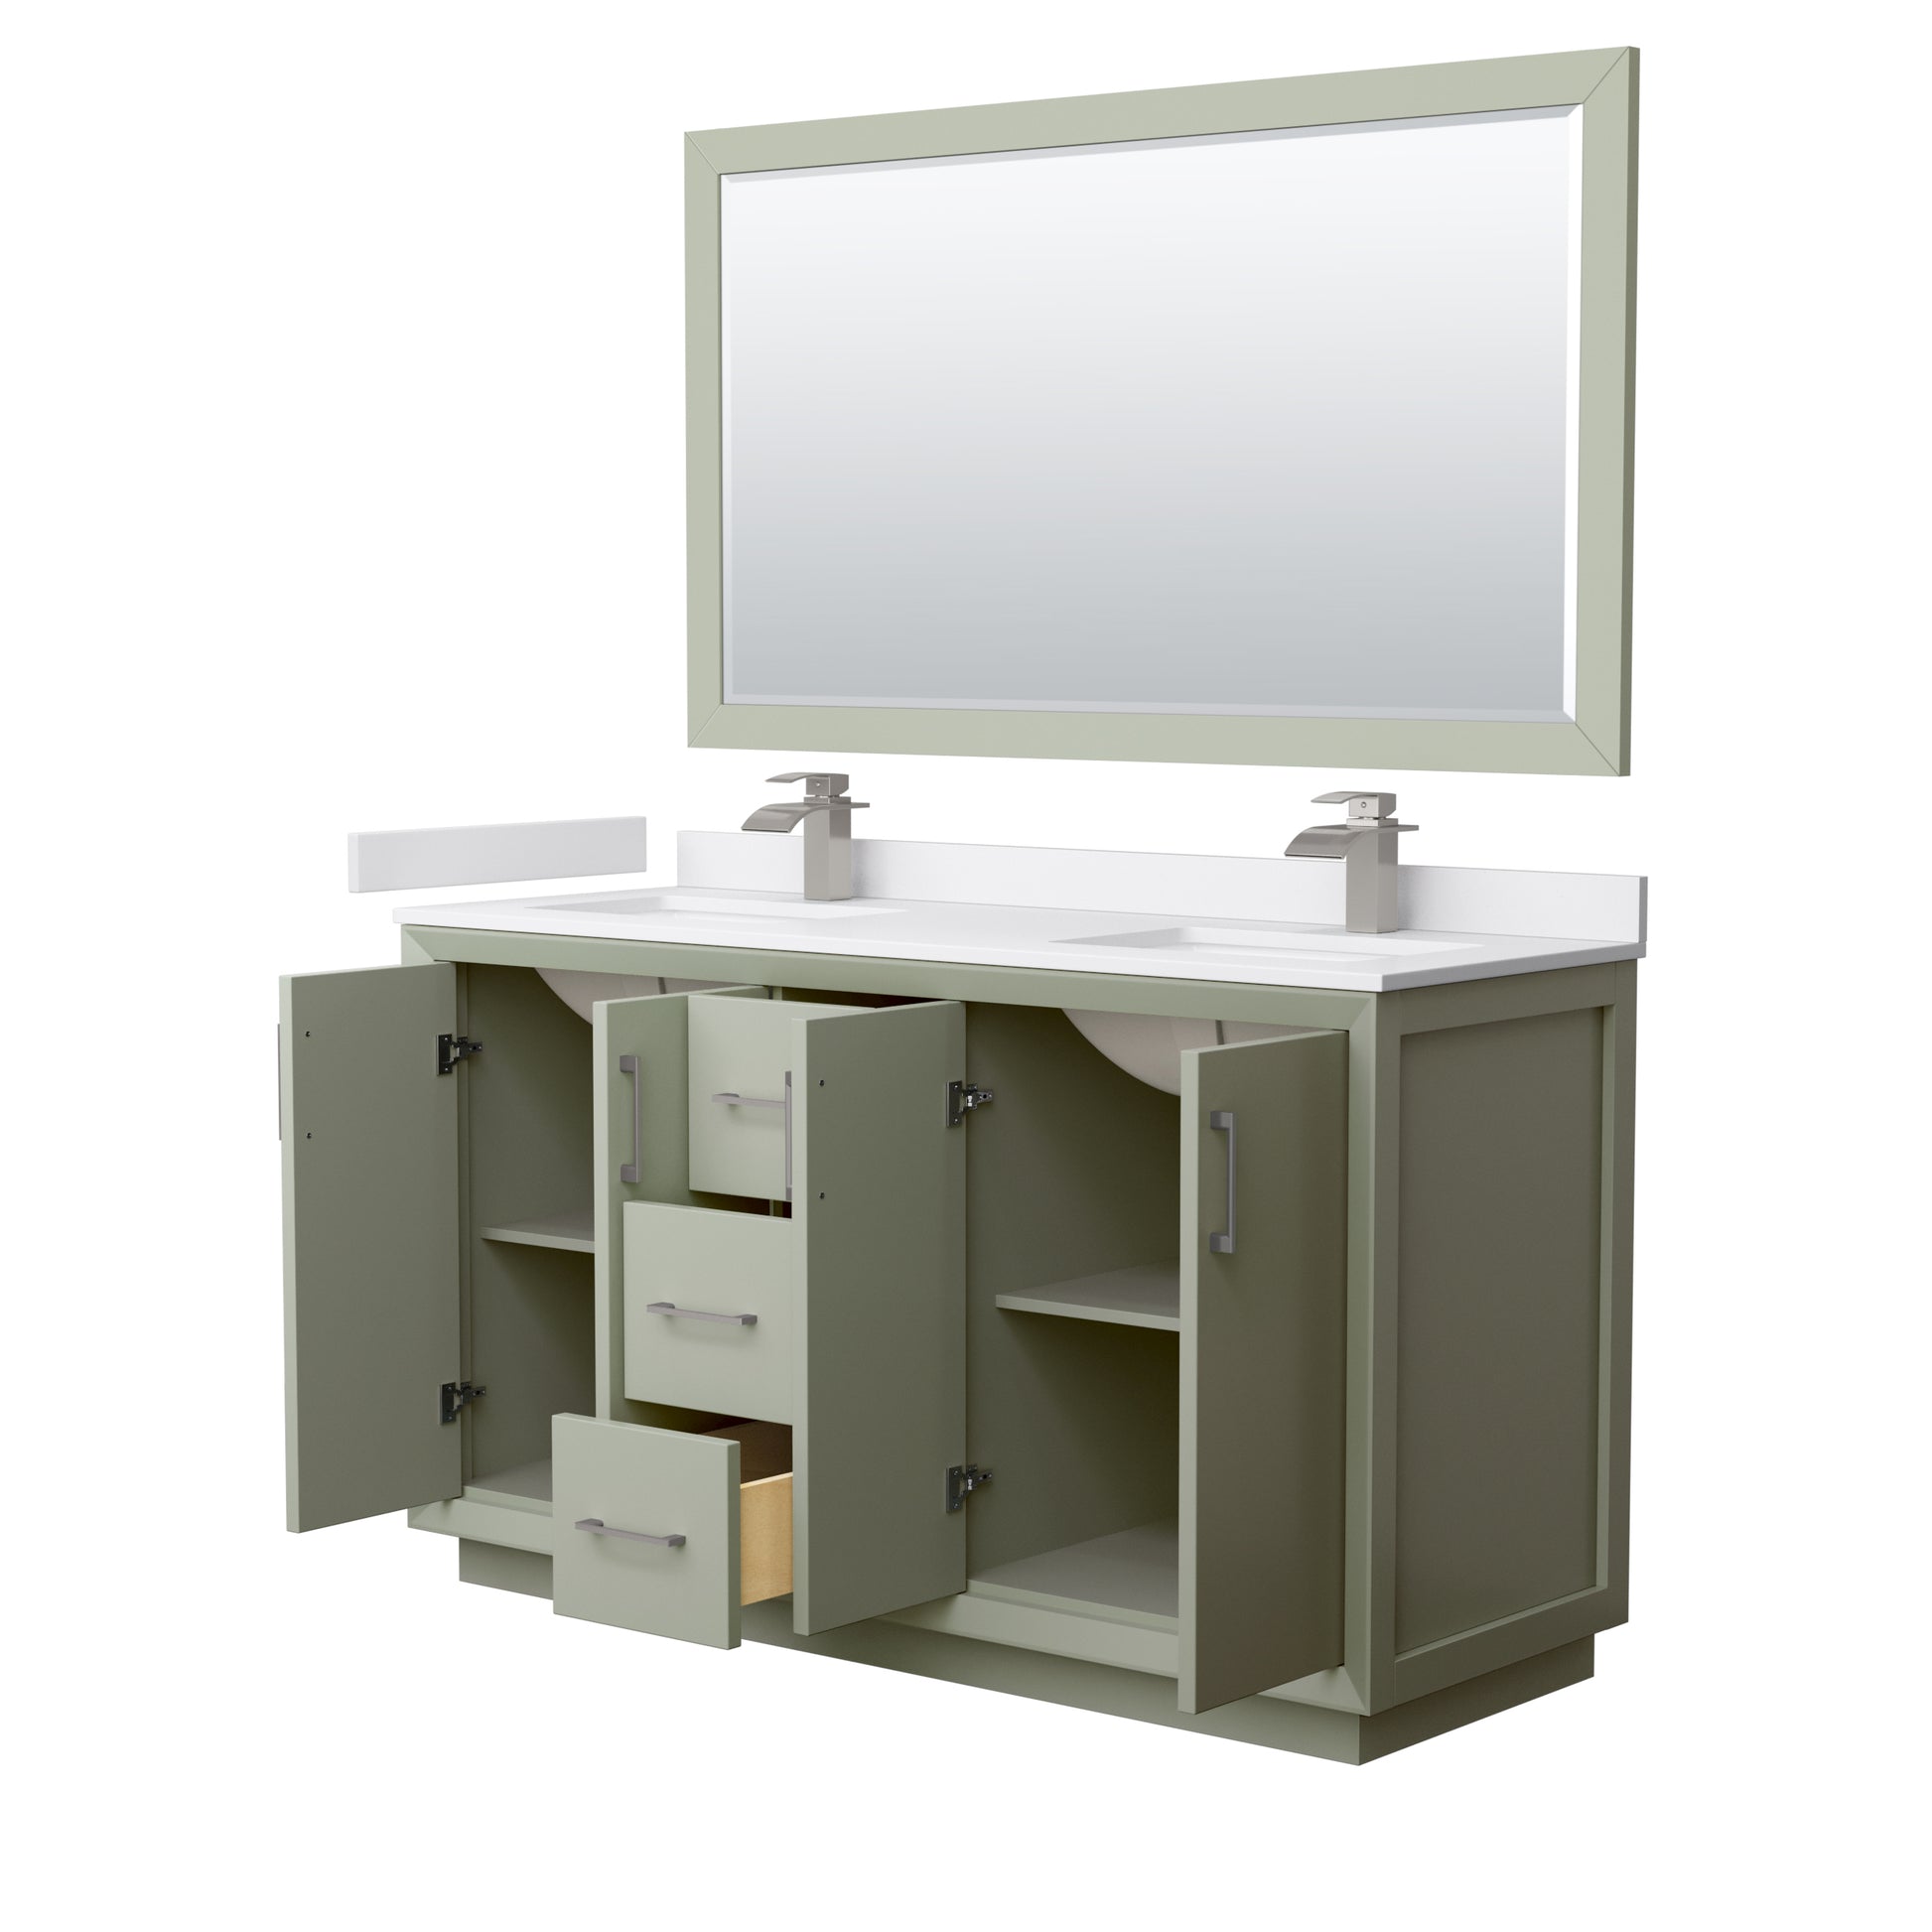 
  
  Strada Double Sink Vanity with White Cultured Marble, Undermount Square Sink, Optional Trim and Mirror
  
